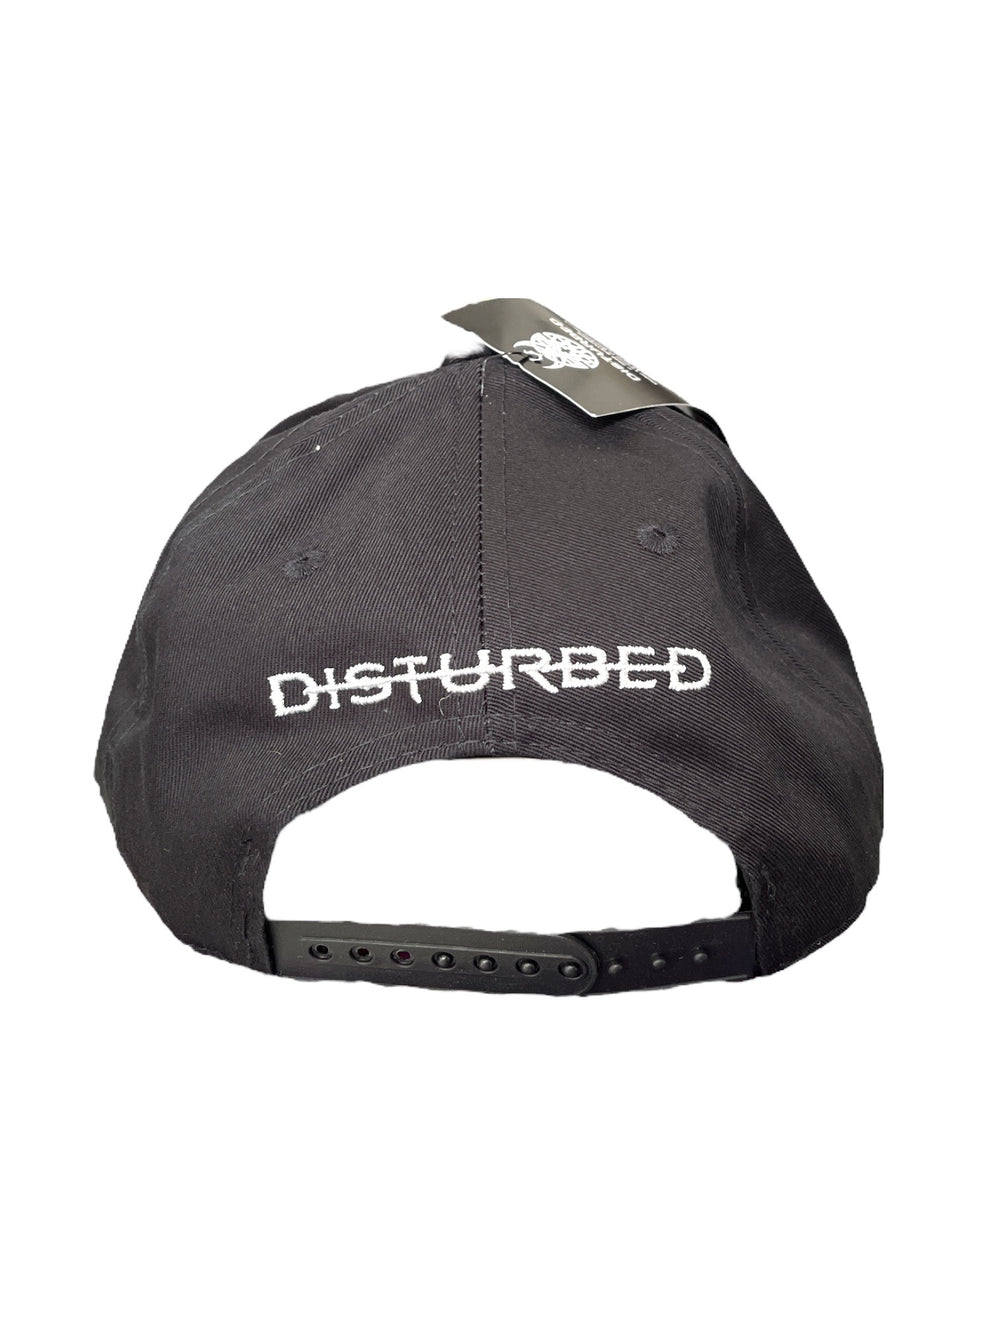 Disturbed Official Silver Sonic / Embroidered Peak Cap Adjustable Brand New